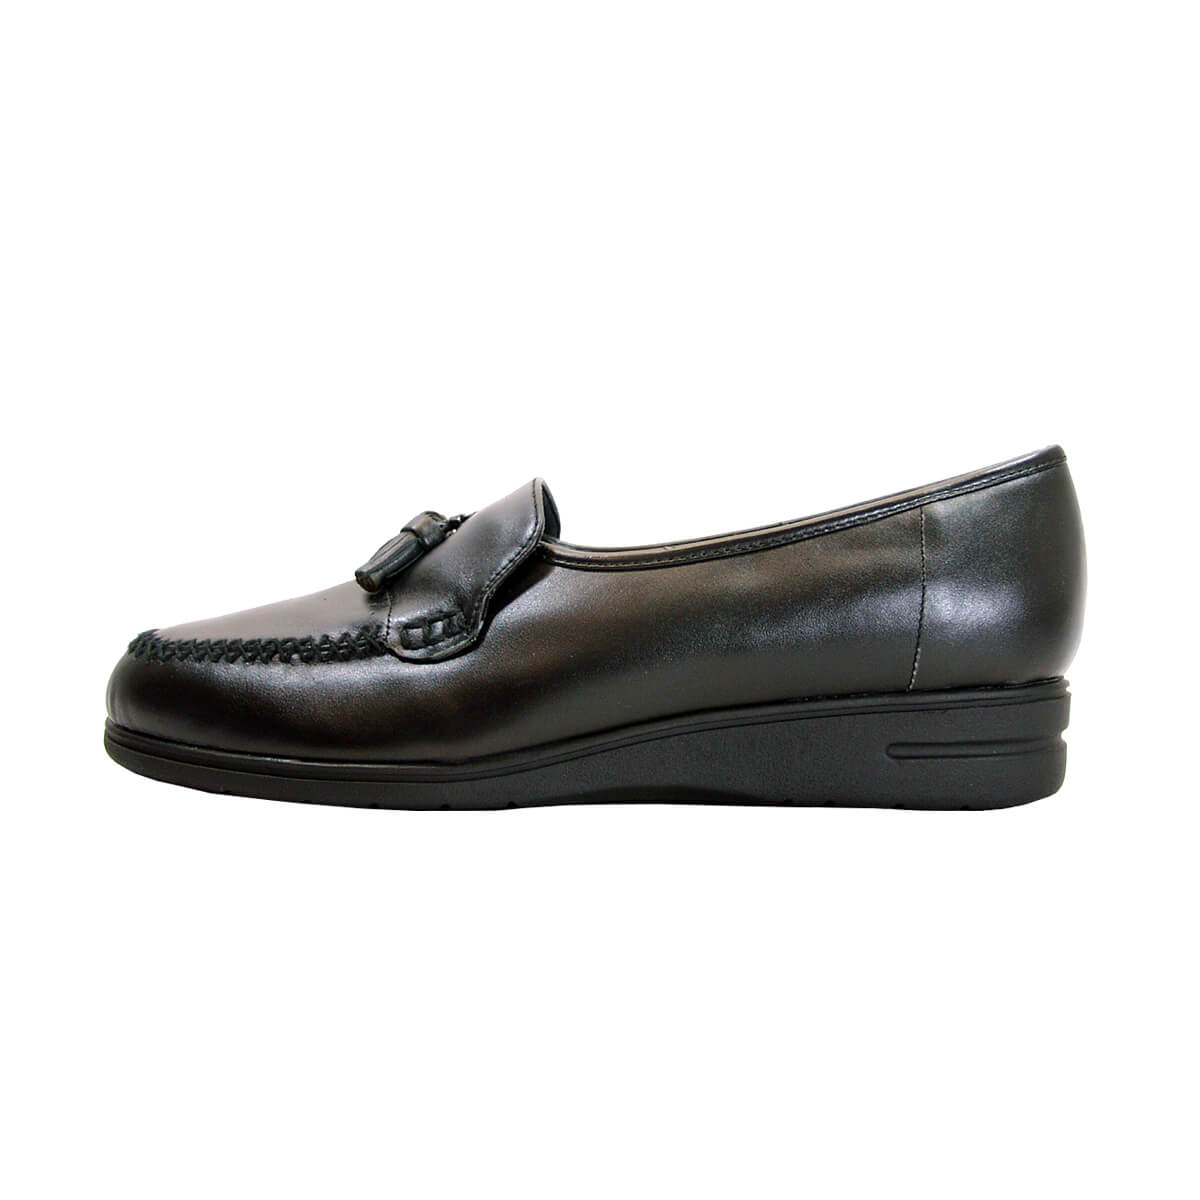 24 HOUR COMFORT Fawn Women's Wide Width Leather Loafers